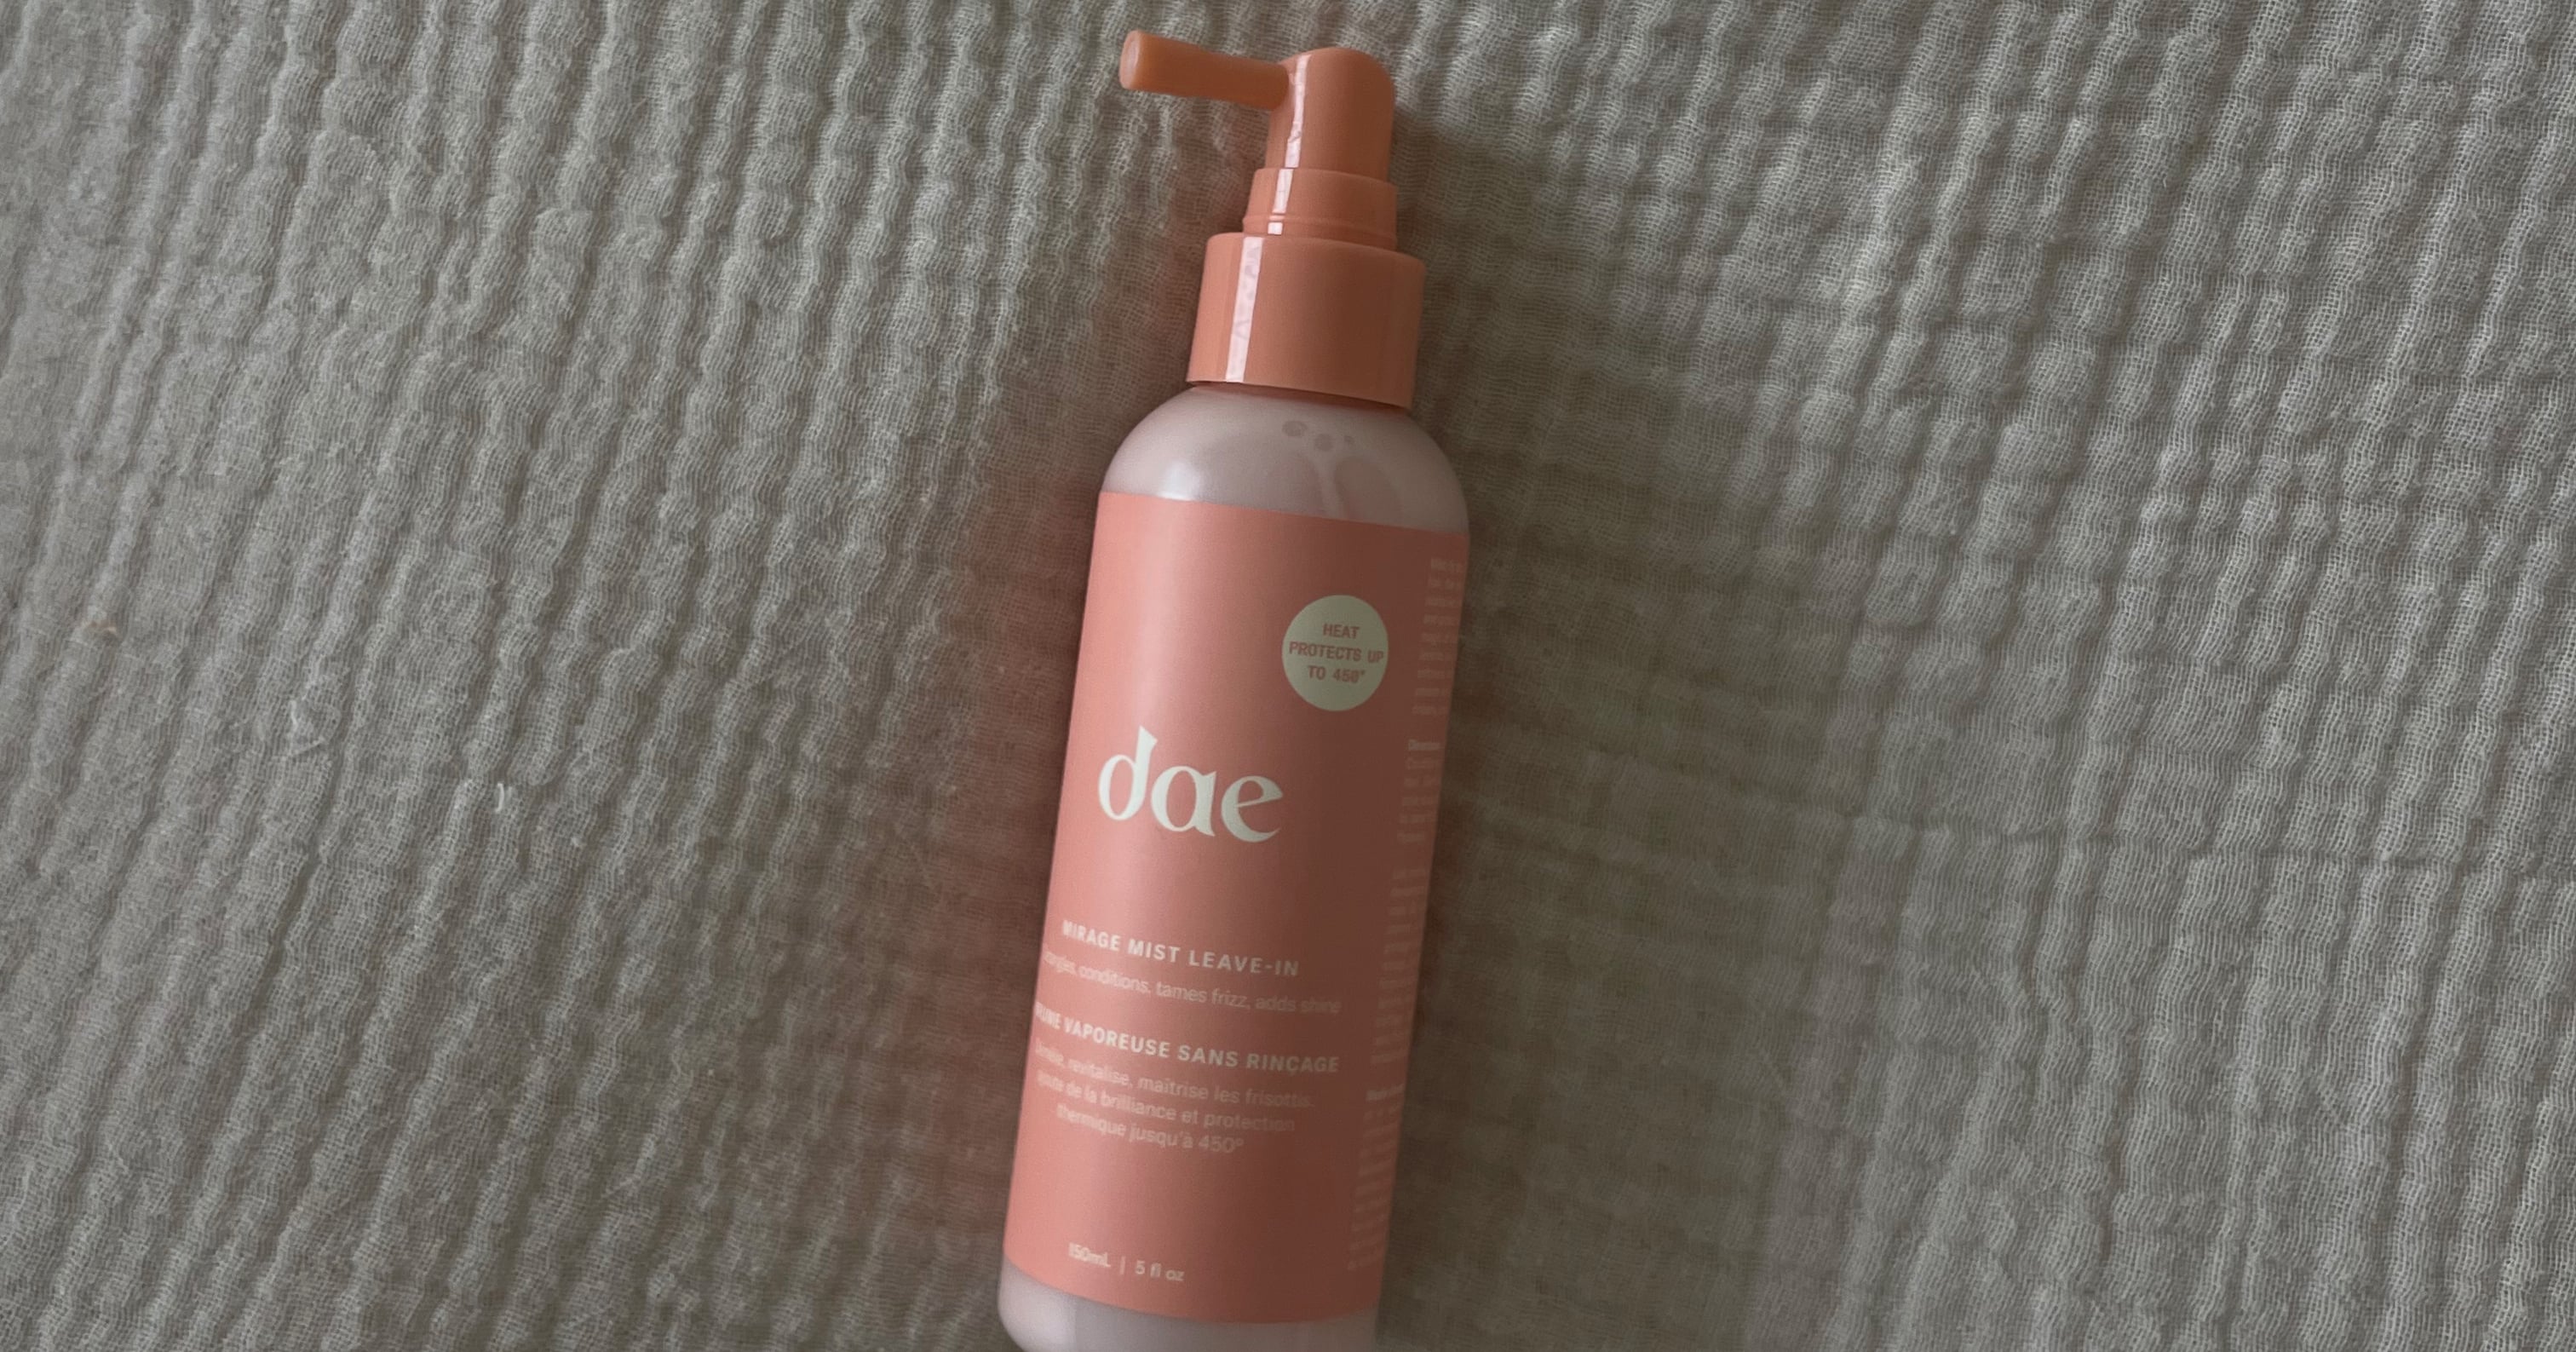 I Got My Hands on Dae’s Newest Hair Product — Here Are My Honest Thoughts